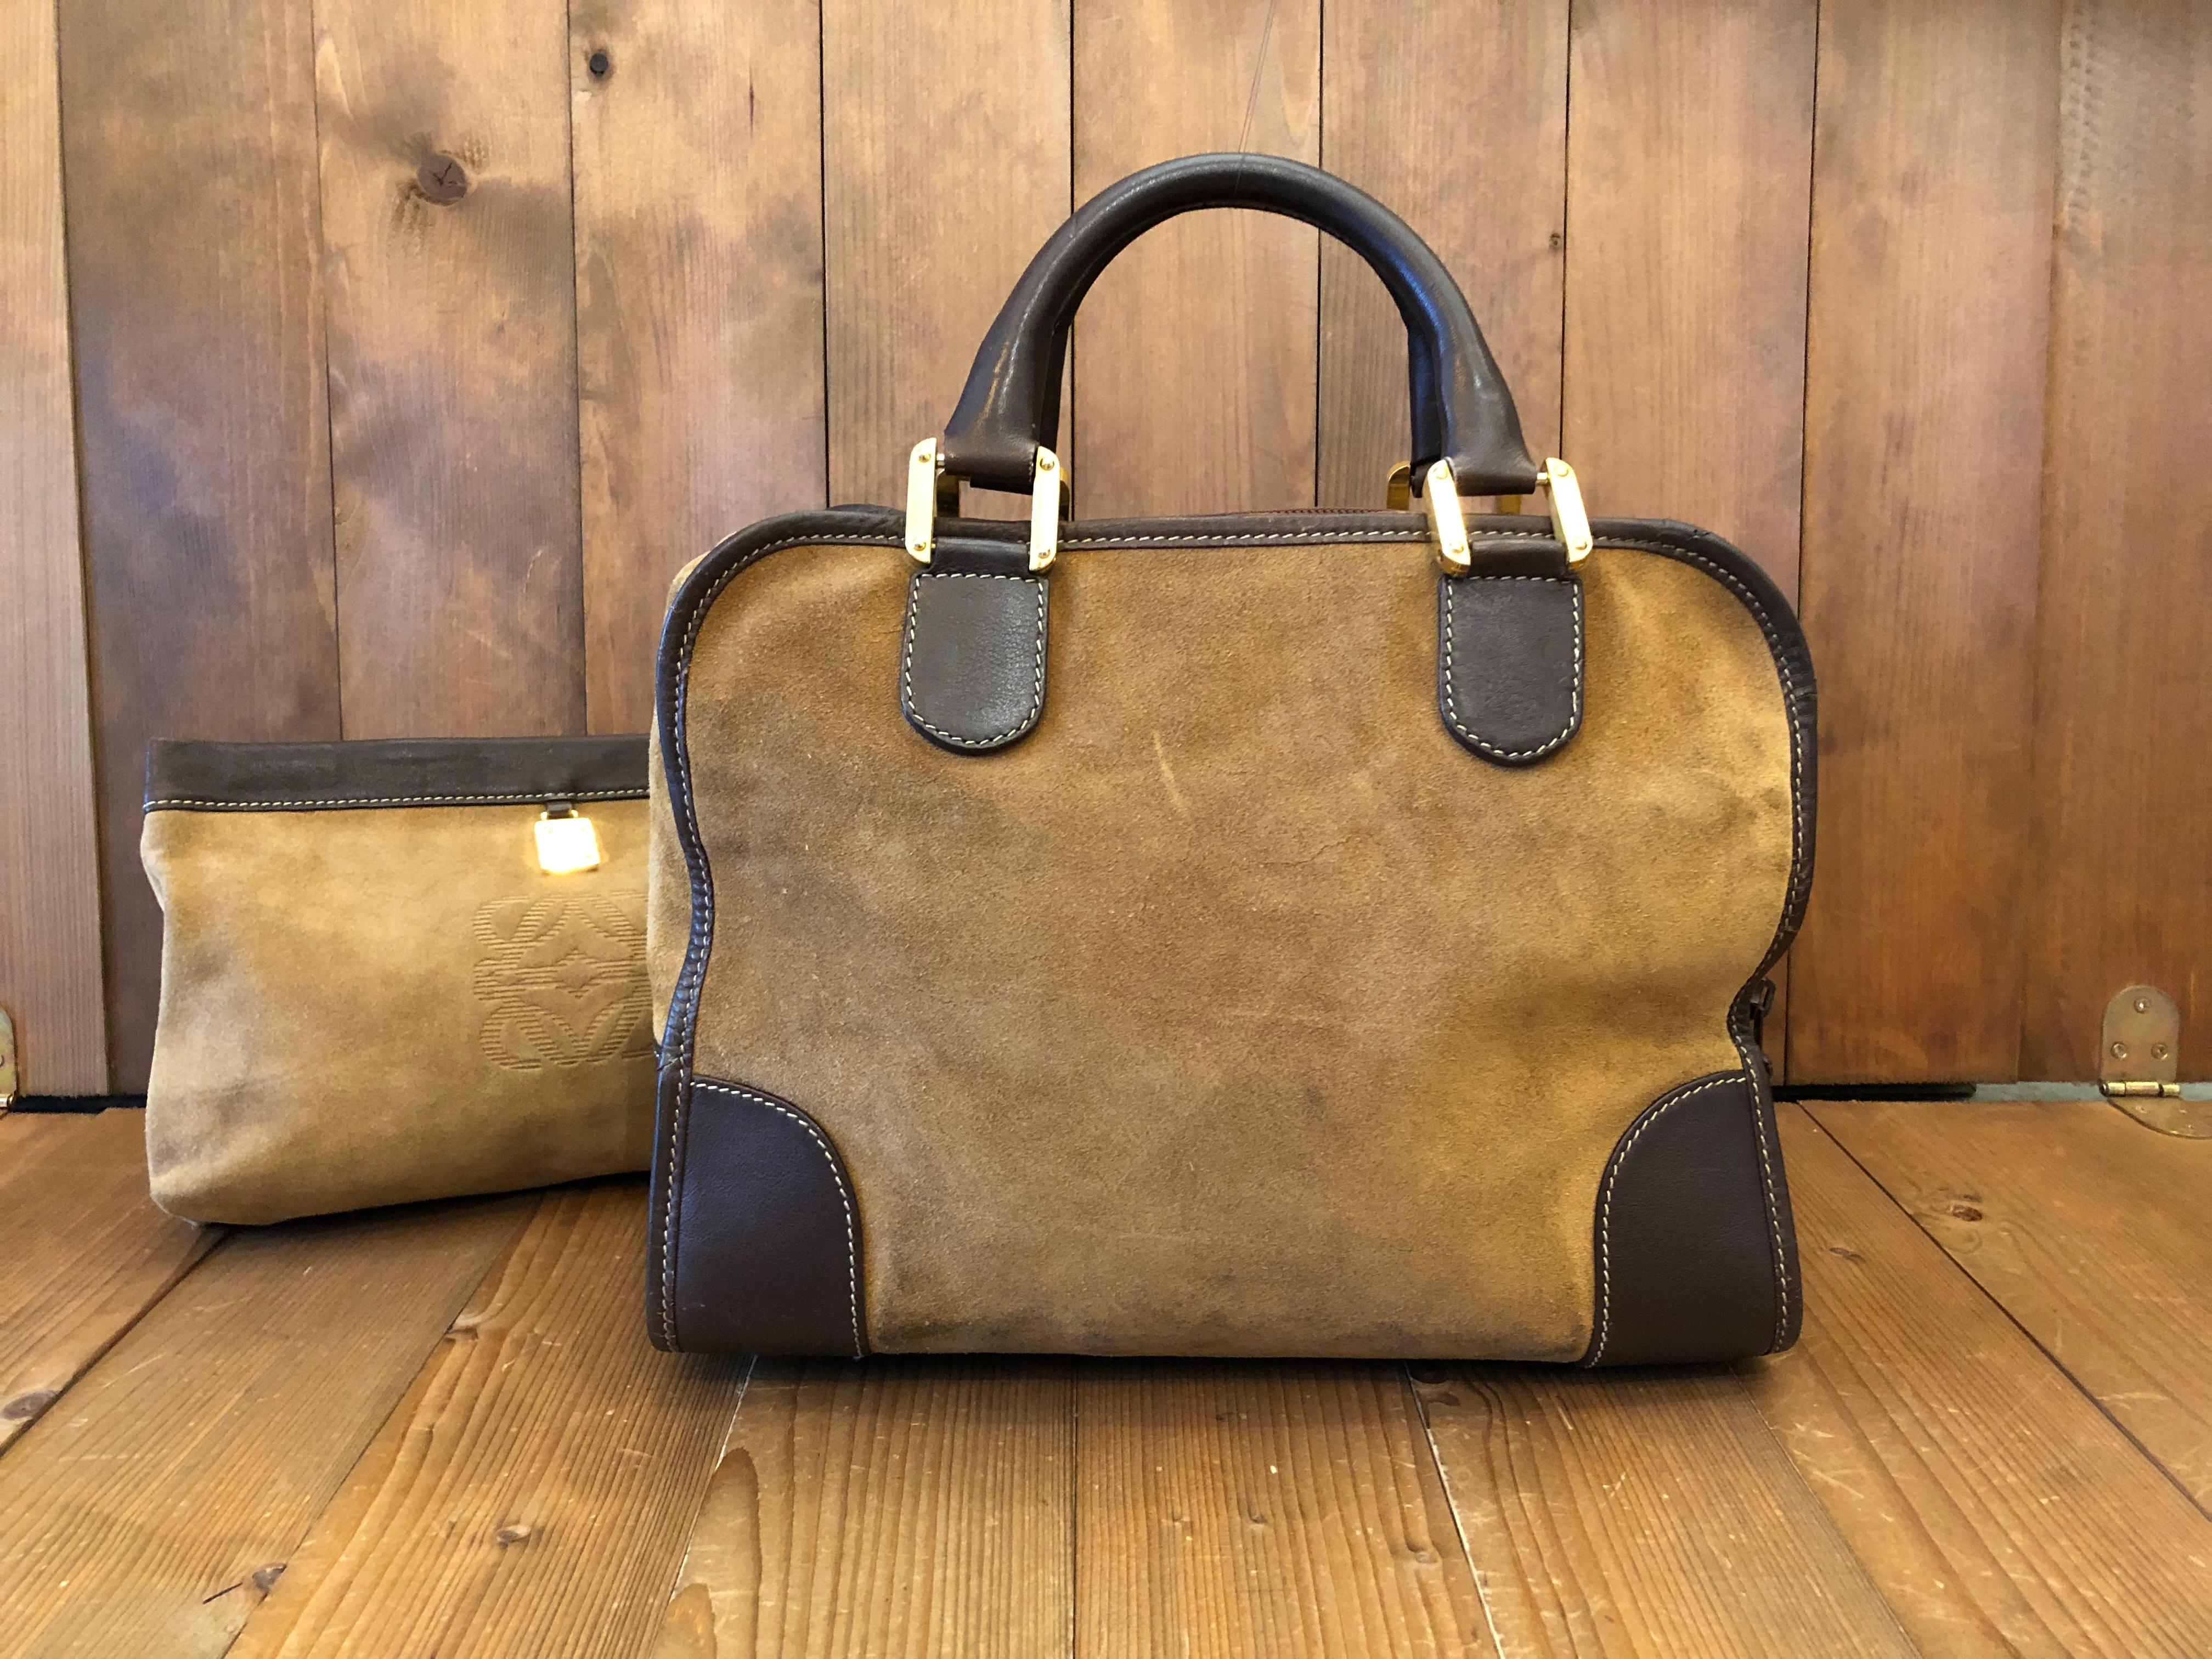 This vintage LOEWE Amazona boston bag is crafted of calfskin leather and suede in brown. Top zipper closure opens to a brown leather interior featuring a zippered pocket. Measures approximately 12.5 x 9 x 6 inches Handle drop 4 inches. Comes with